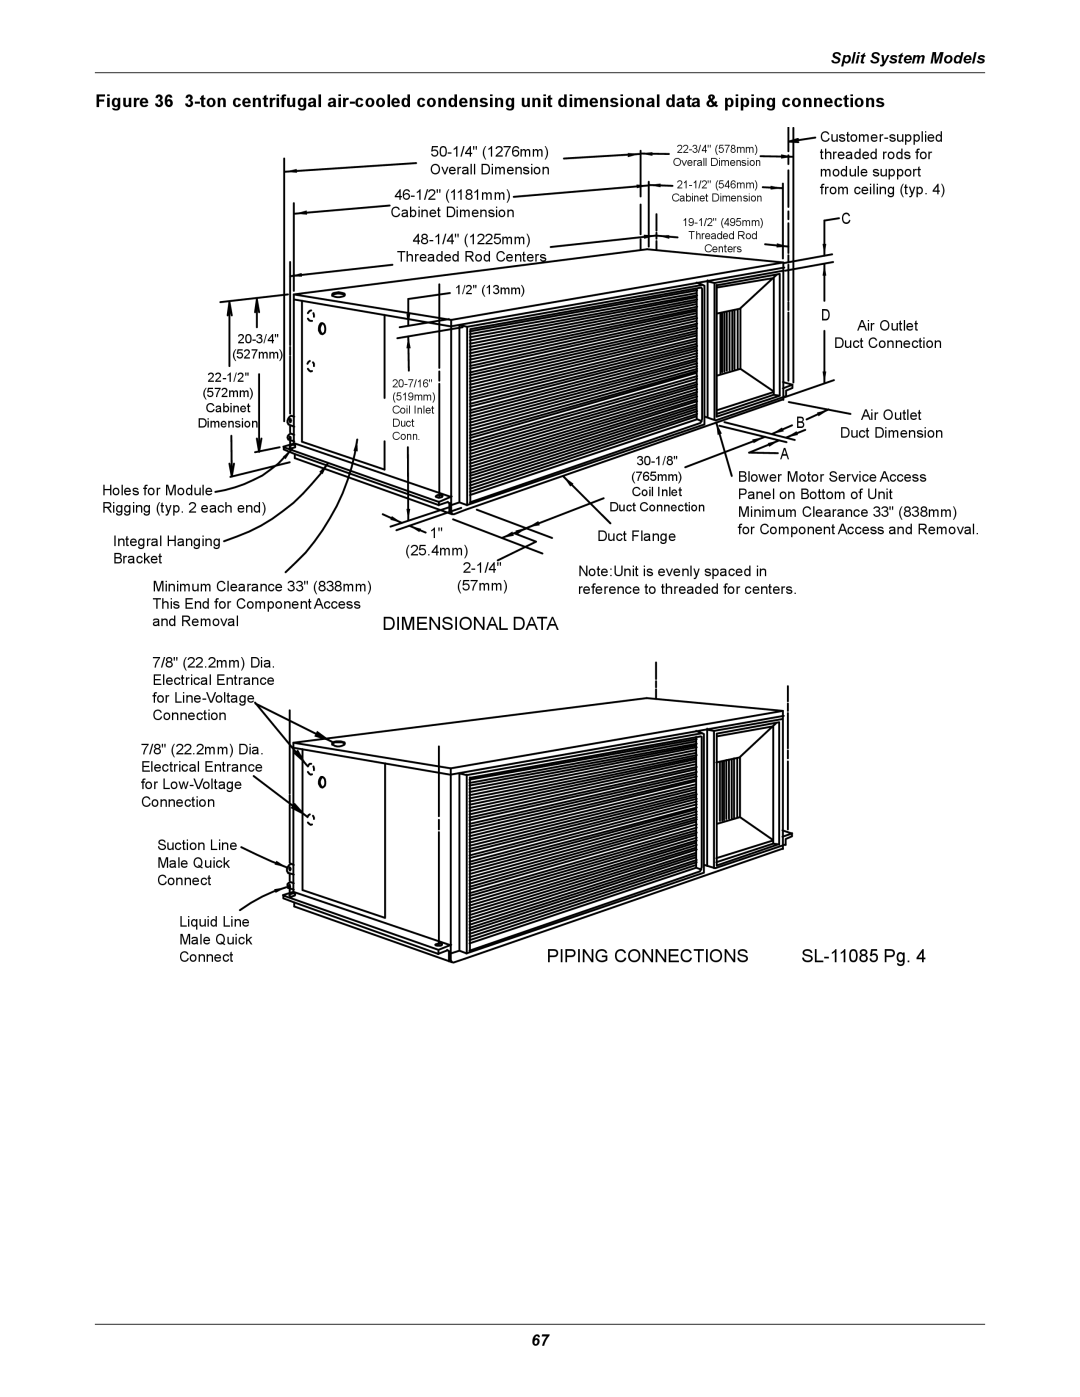 Emerson 3000 installation manual Dimensional Data, Piping Connections, SL-11085Pg, Split System Models 